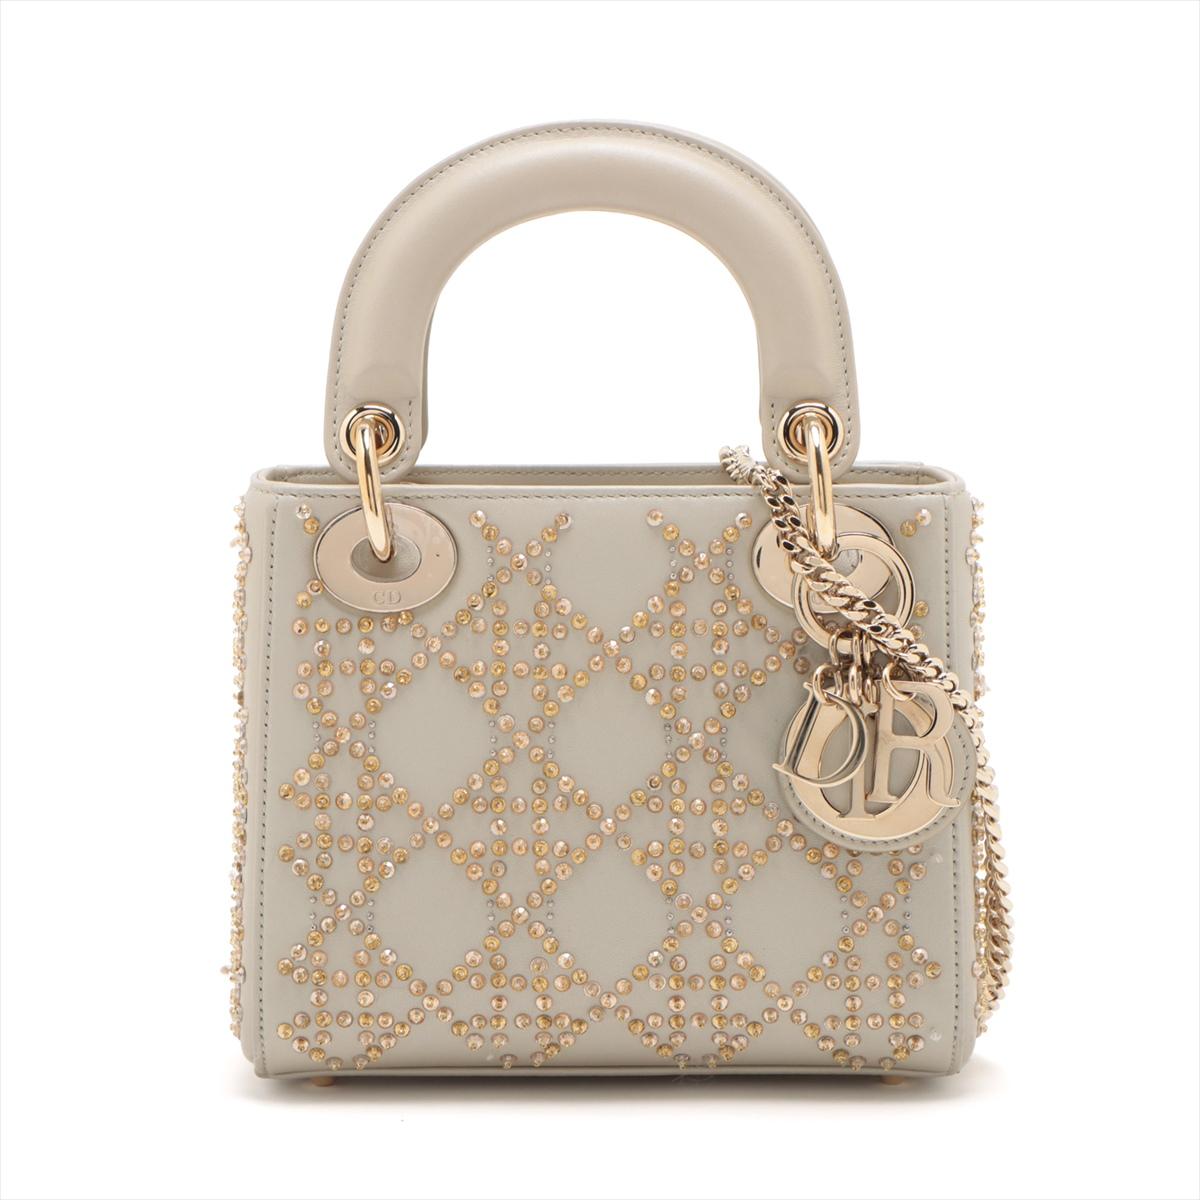 Mini Lady Dior Bag Platinum Metallic Cannage Lambskin with Beaded Embroidery In Good Condition For Sale In Indianapolis, IN